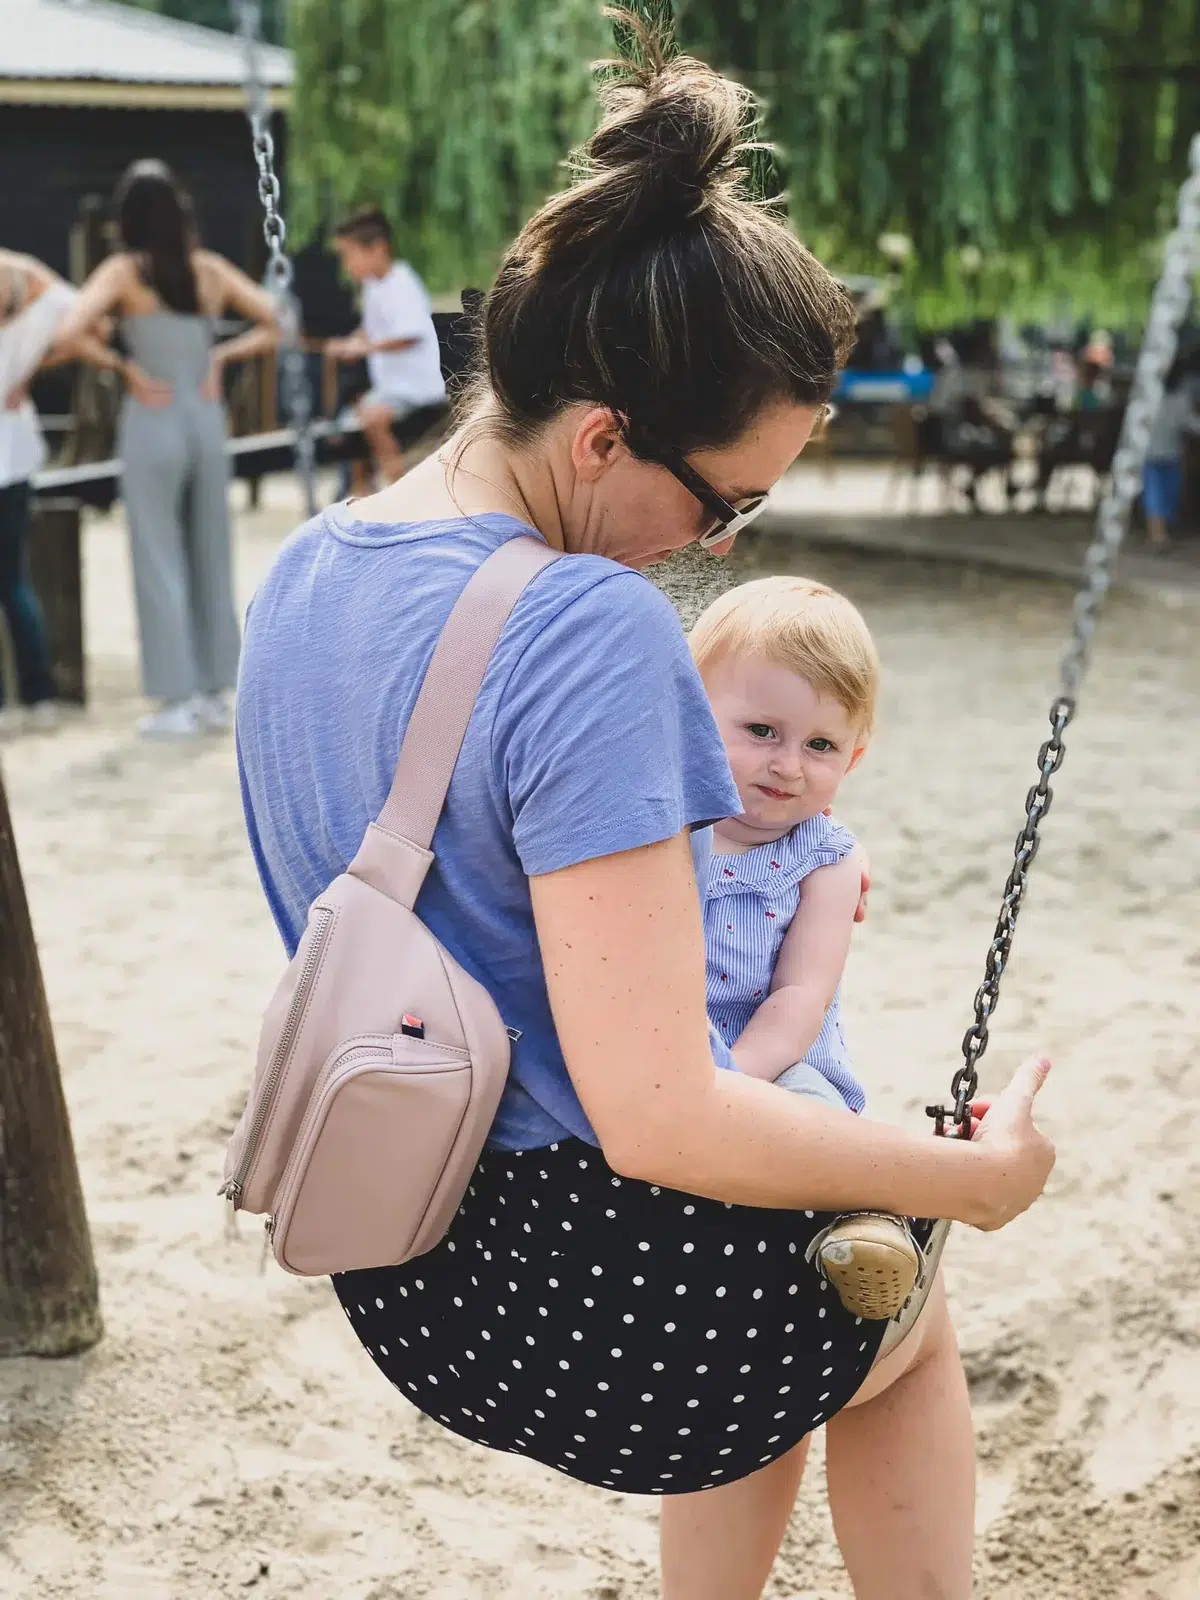 A woman holds a baby on a swing while wearing Kibou's Vegan Leather Bag across her back. 